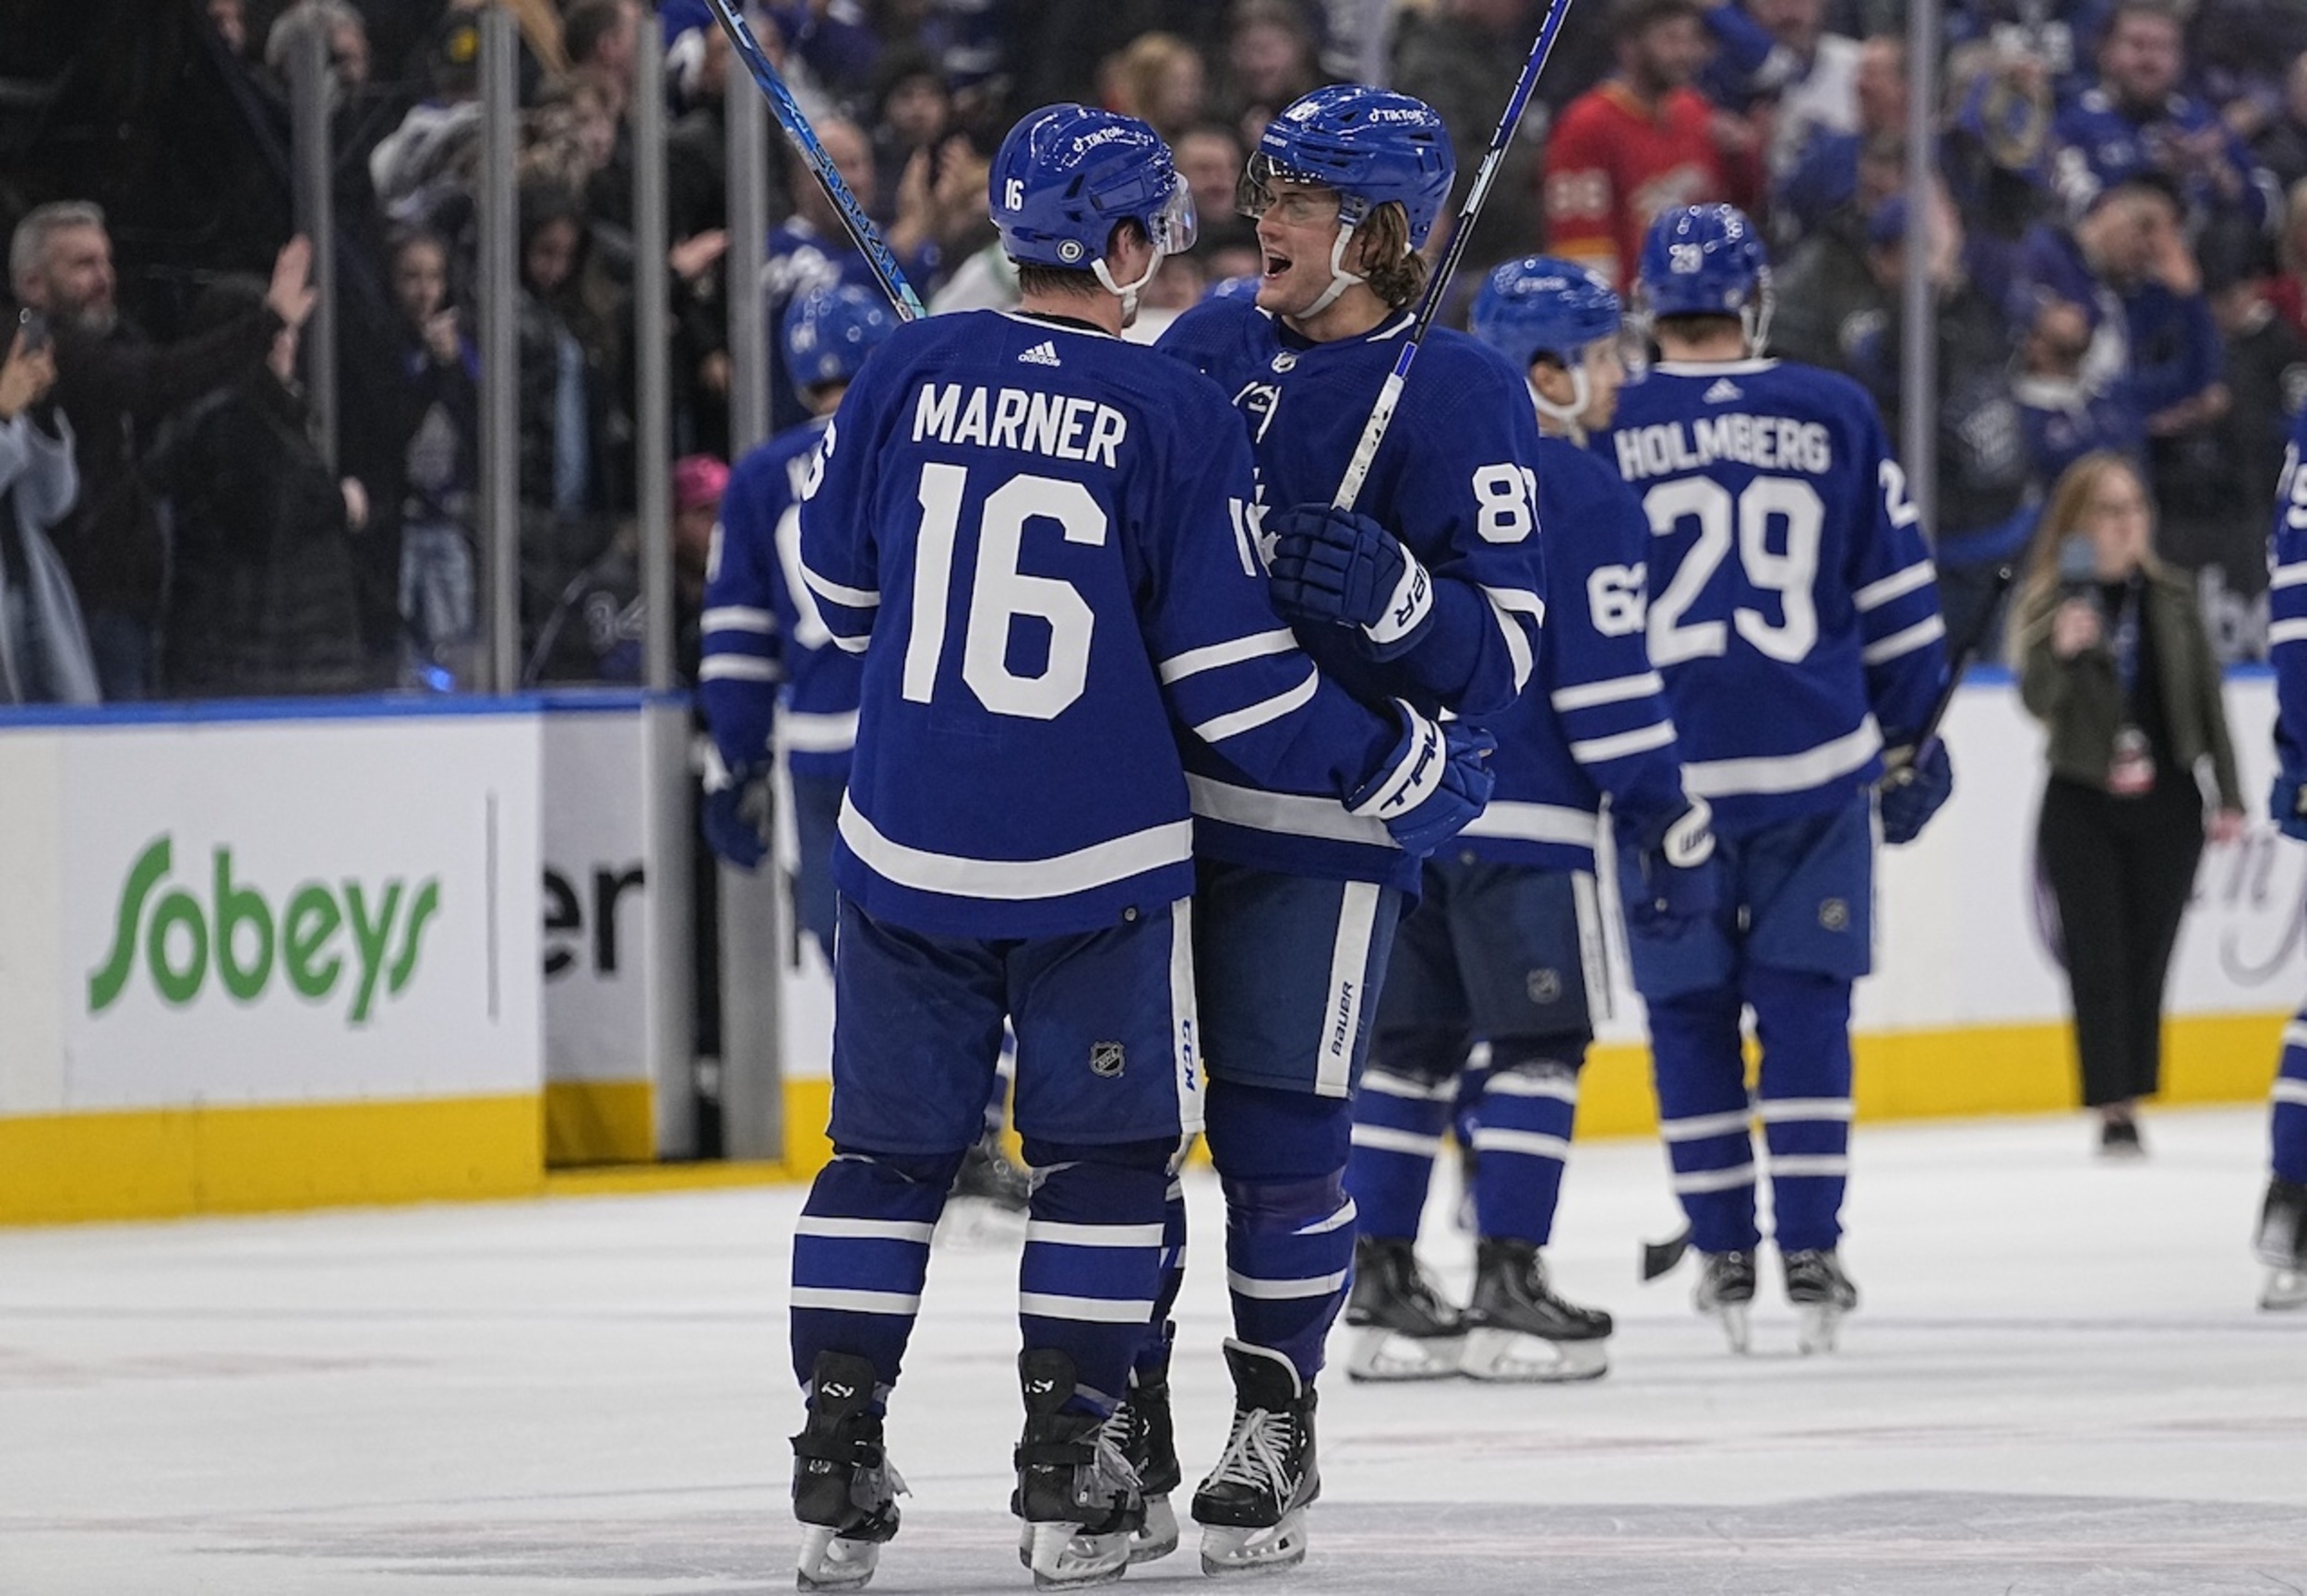 wdytt: what does a successful trade of mitch marner or william nylander look like?